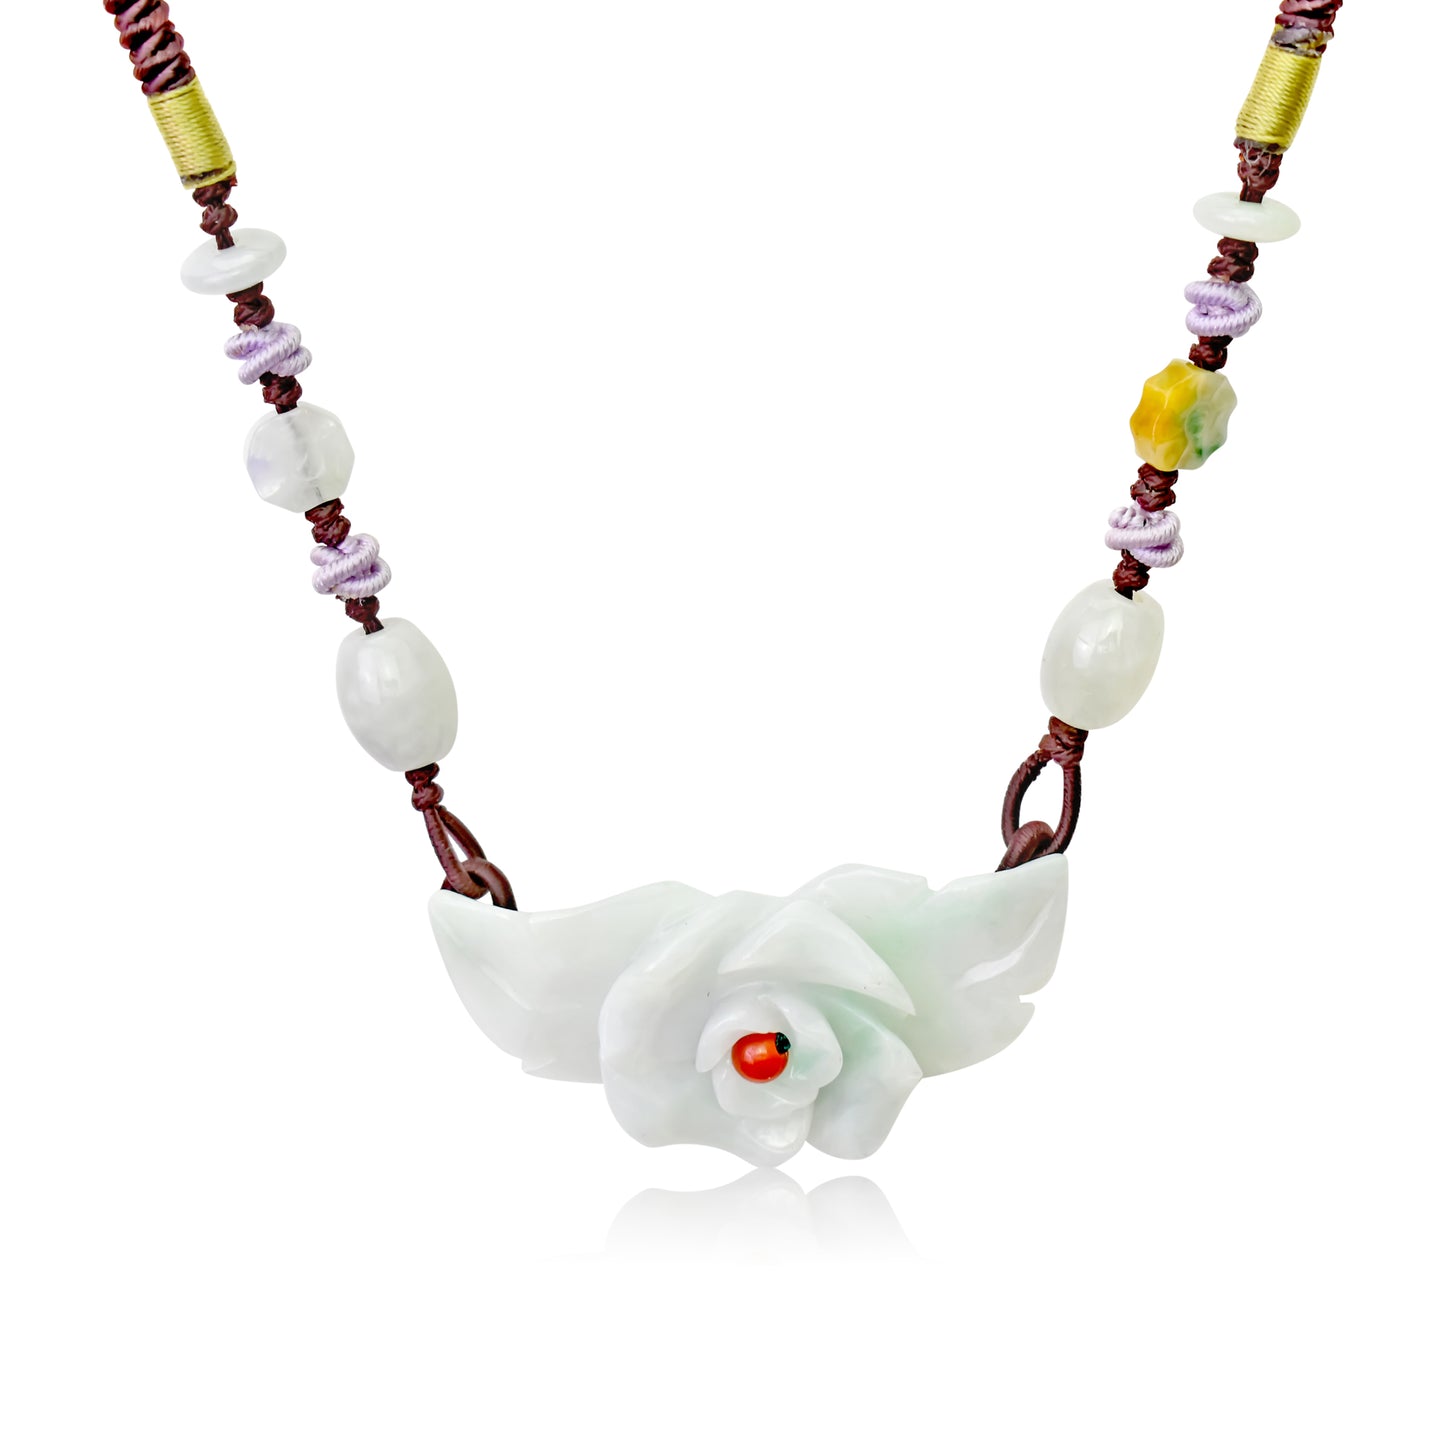 Get Your Love Story Started with Rose Jade Necklace made with Brown Cord